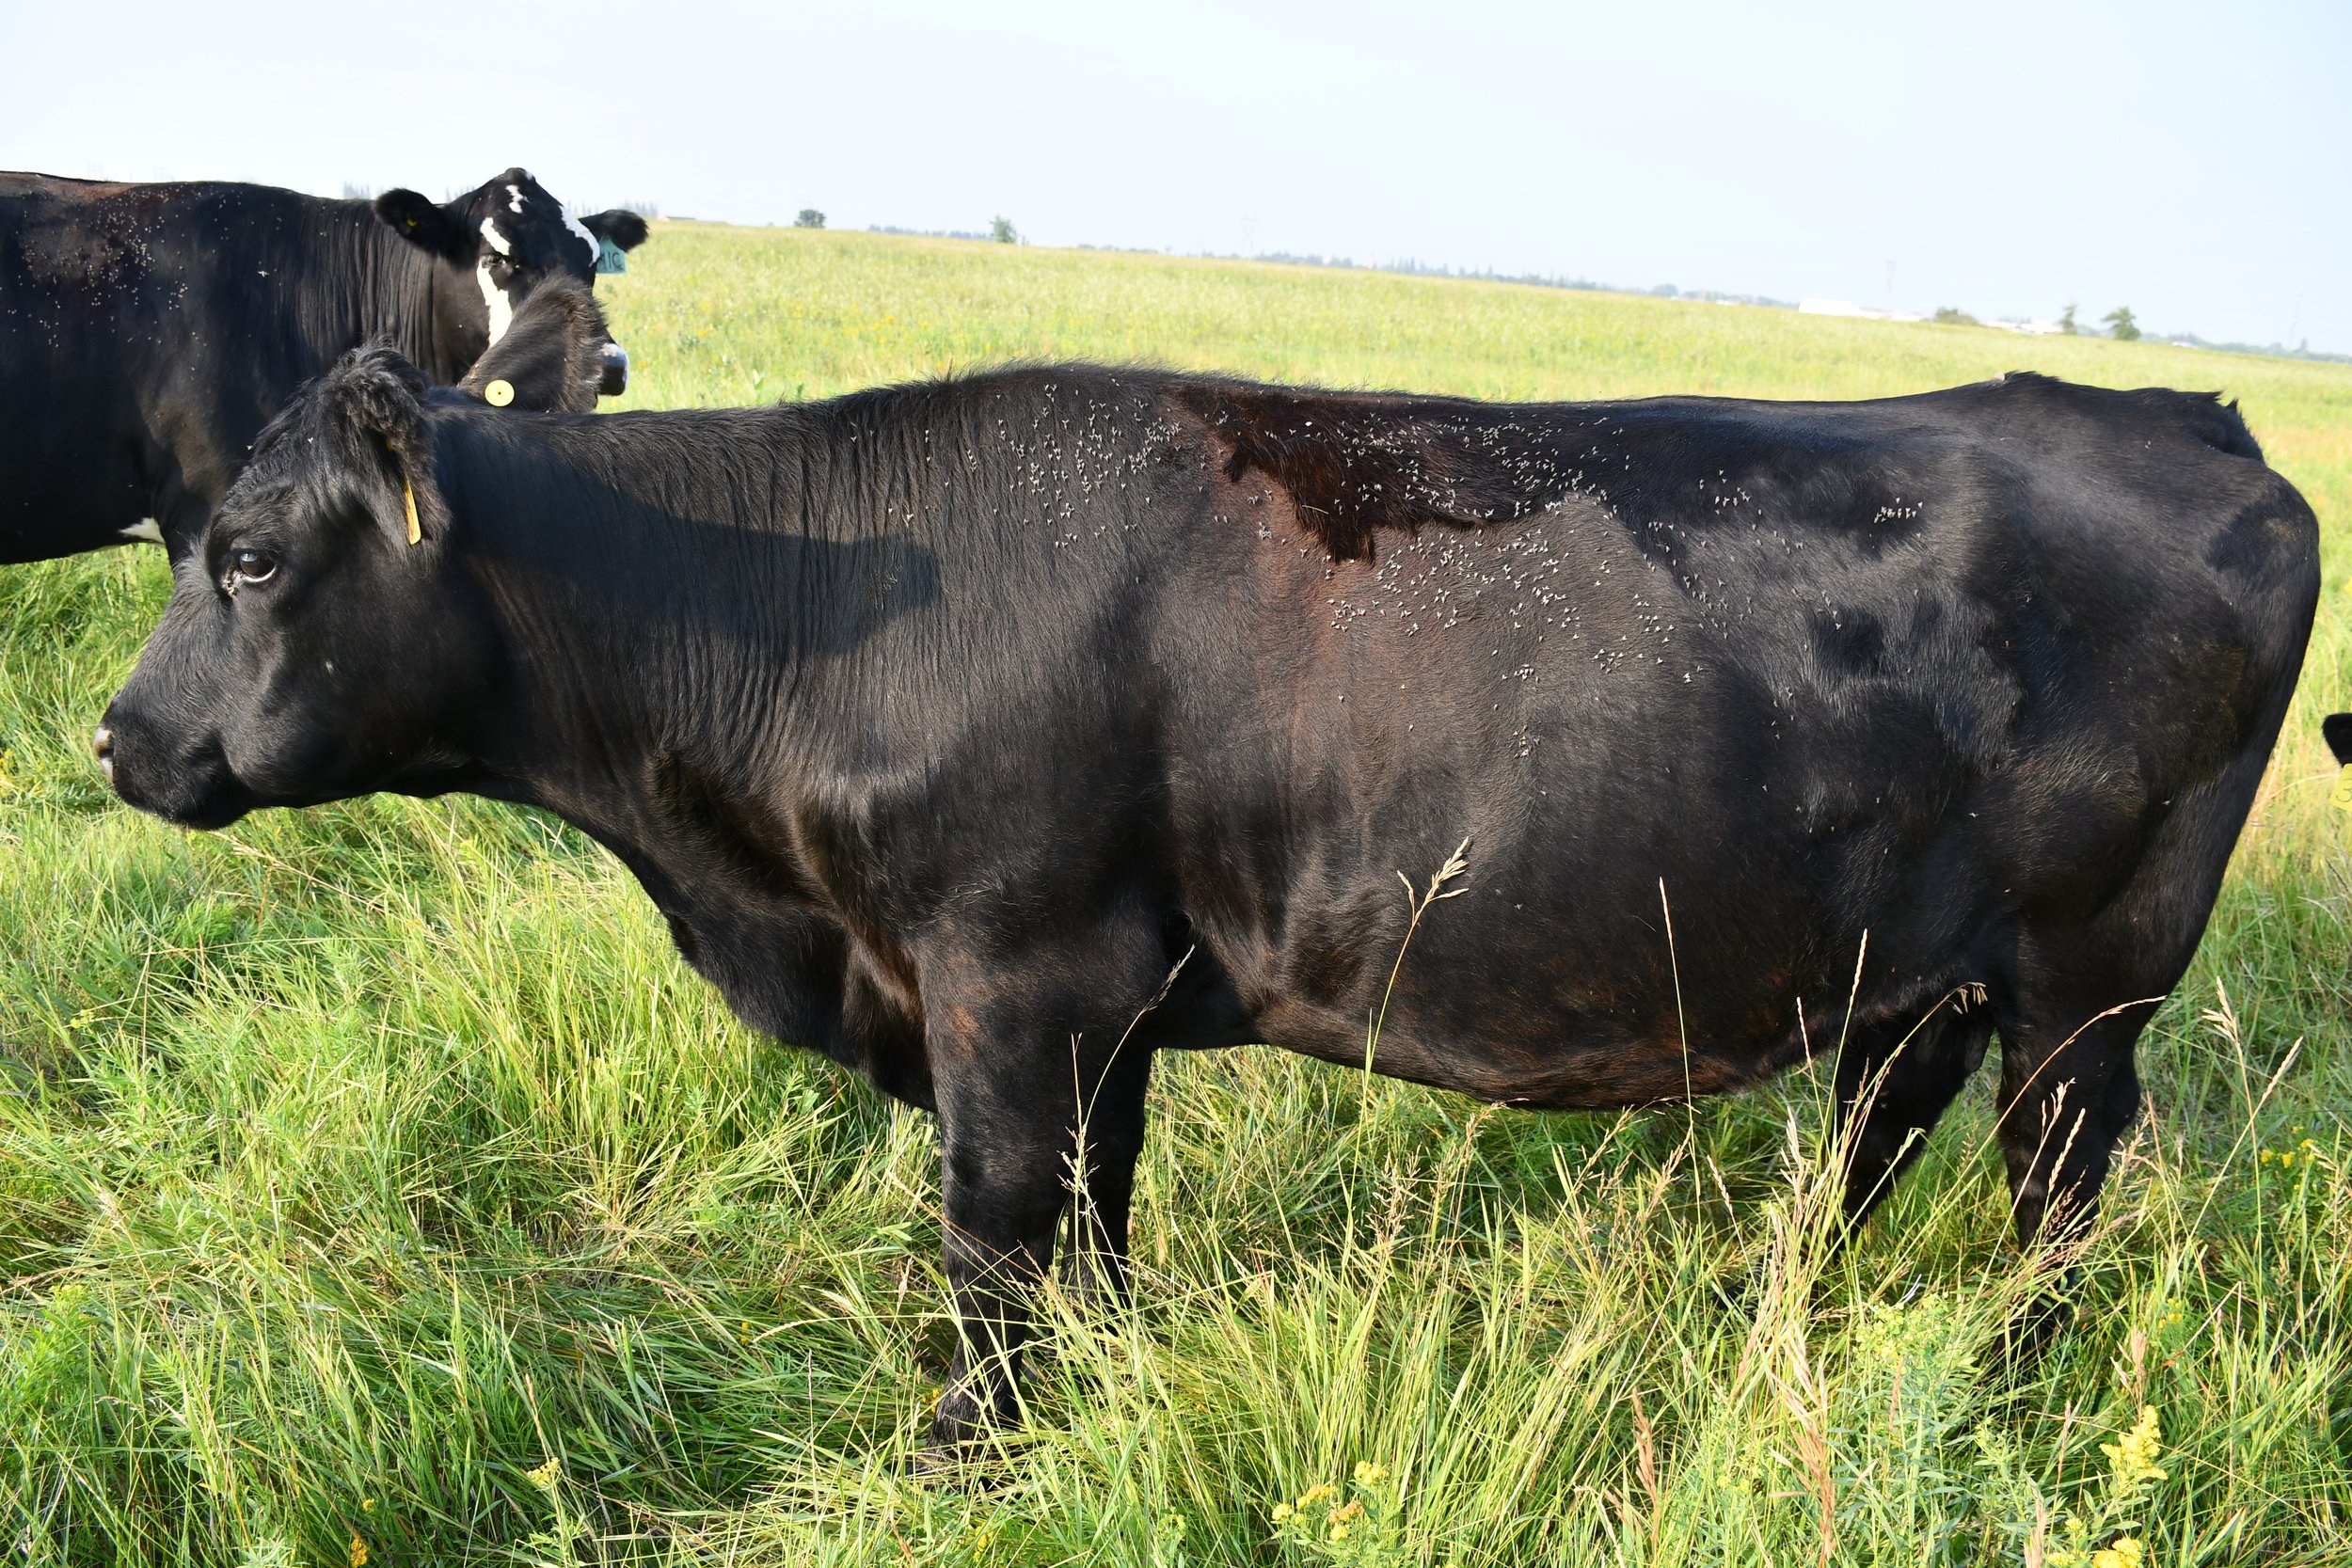 Example picture of a cow from the control group (no Altosid).